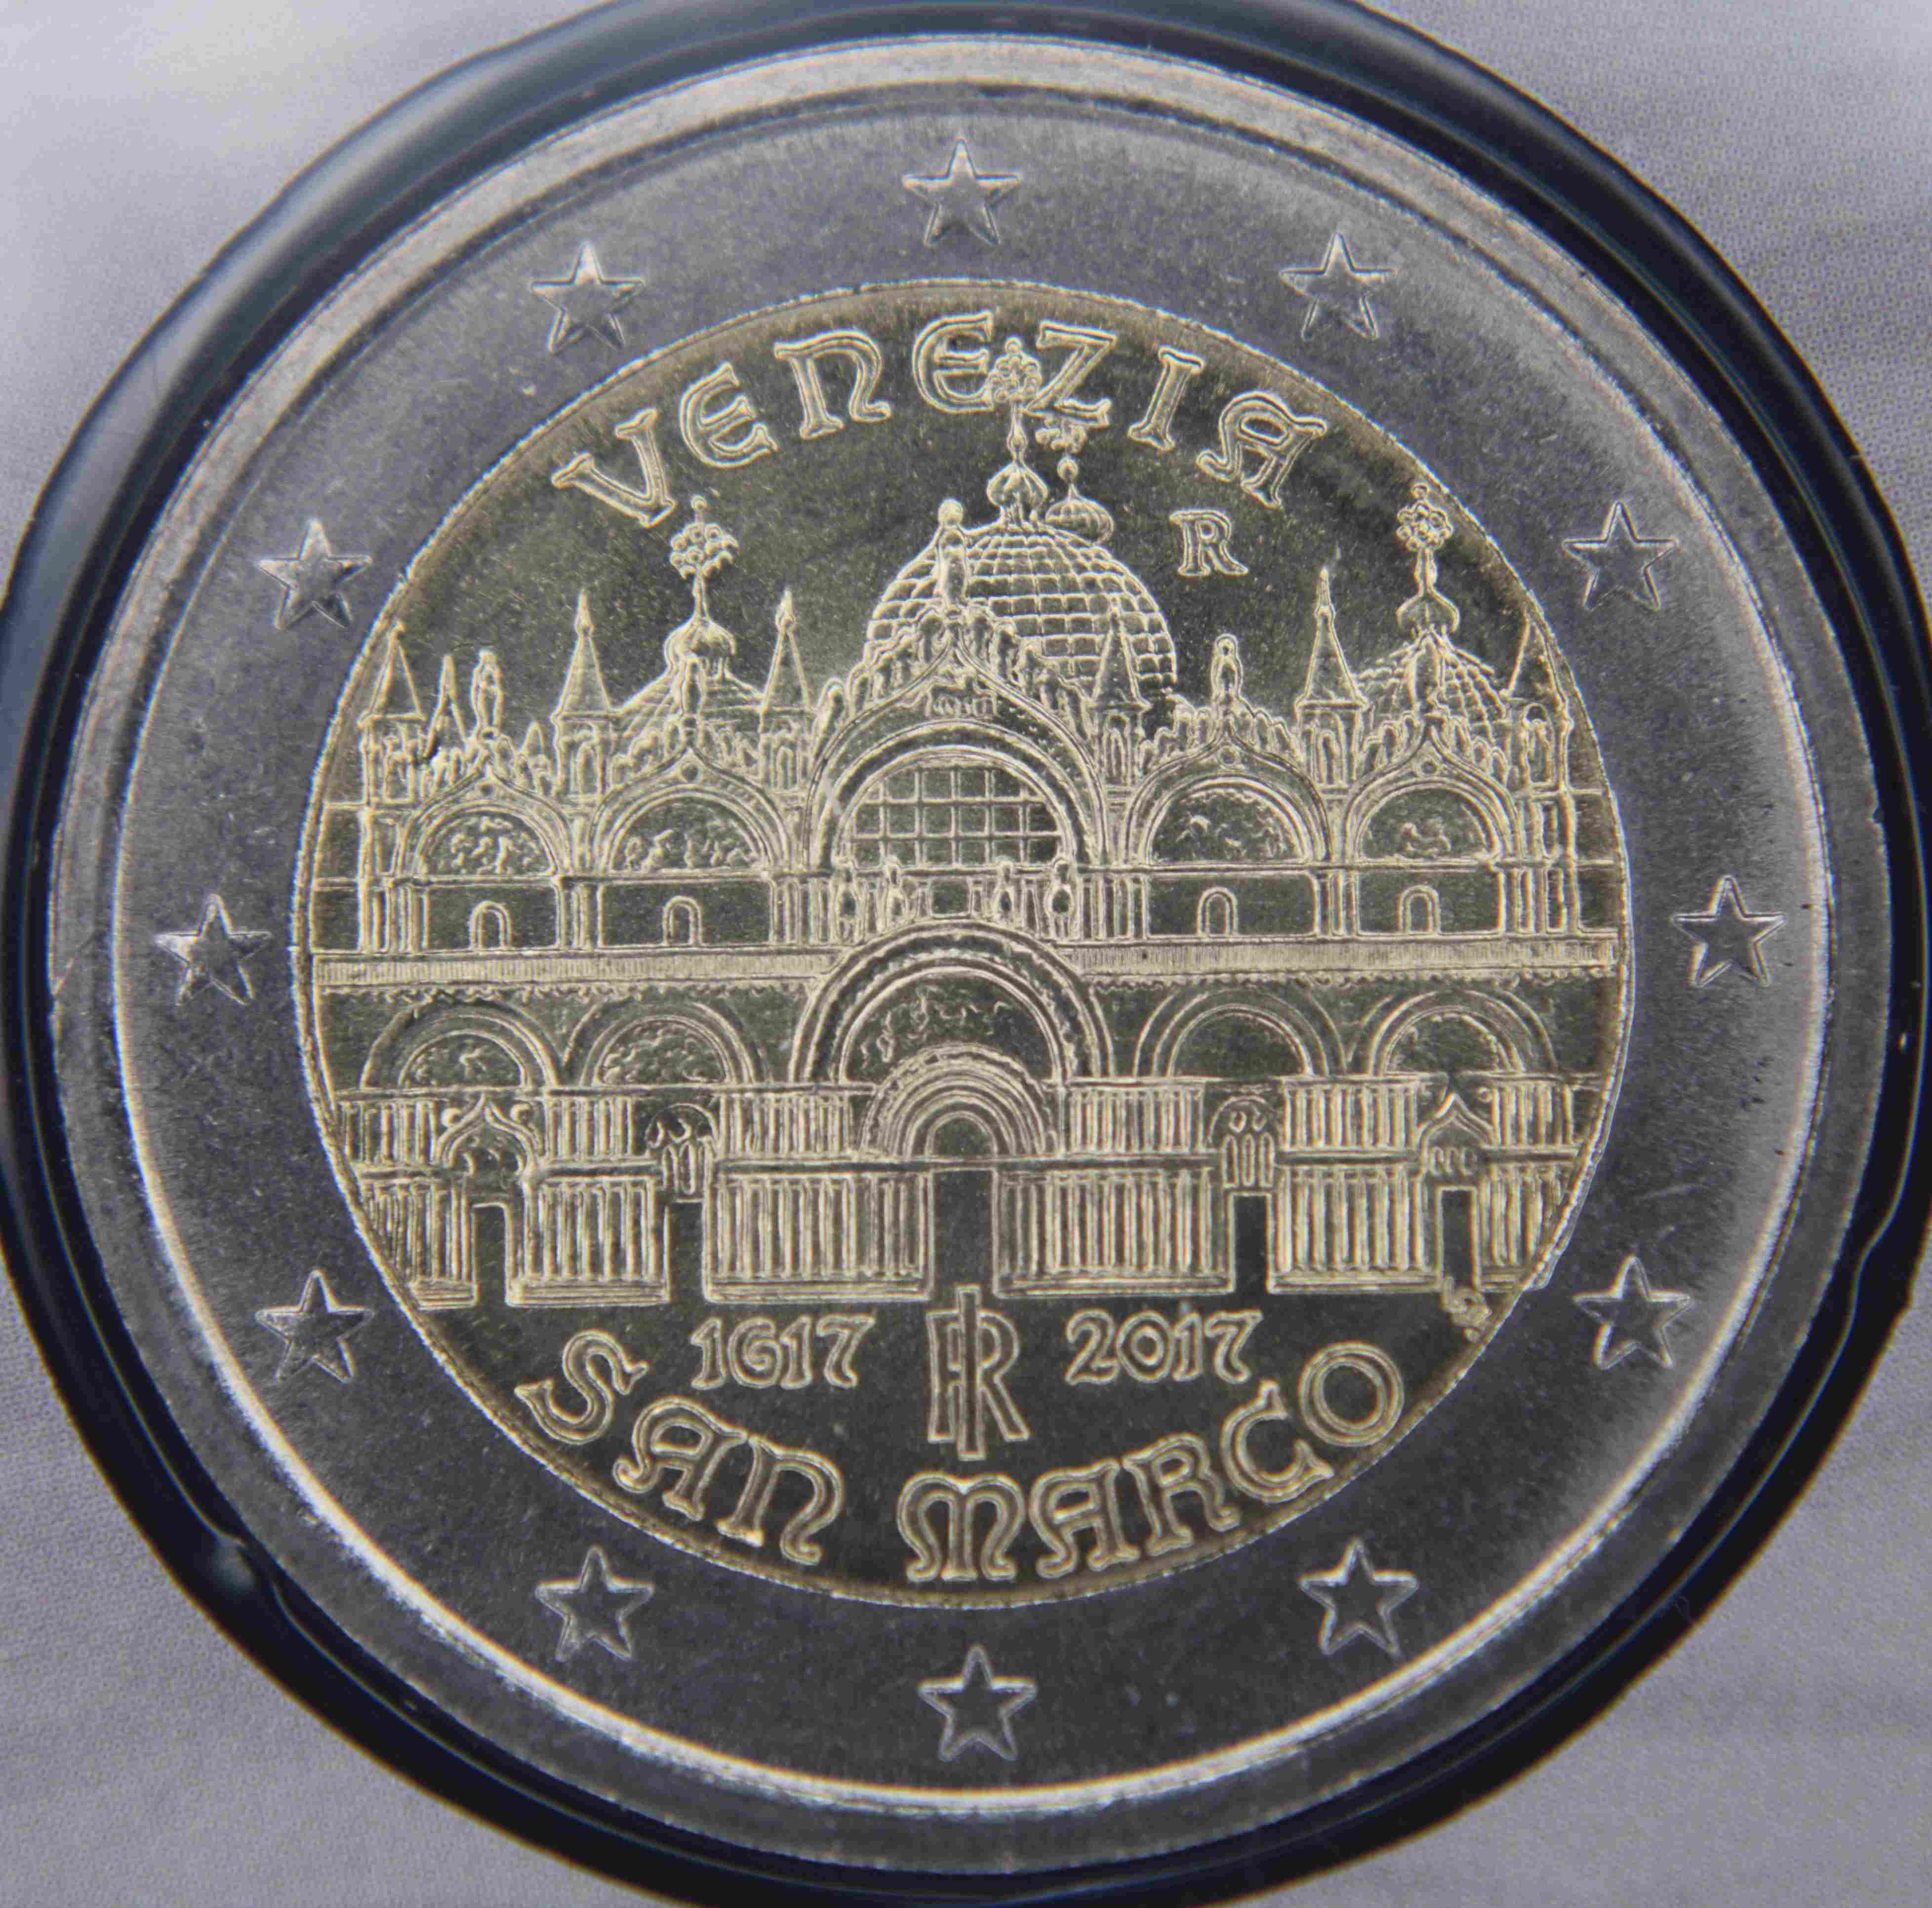 2017 Italy € 2 Euro UNC Coin St Mark's Basilica in Venice 400 Years